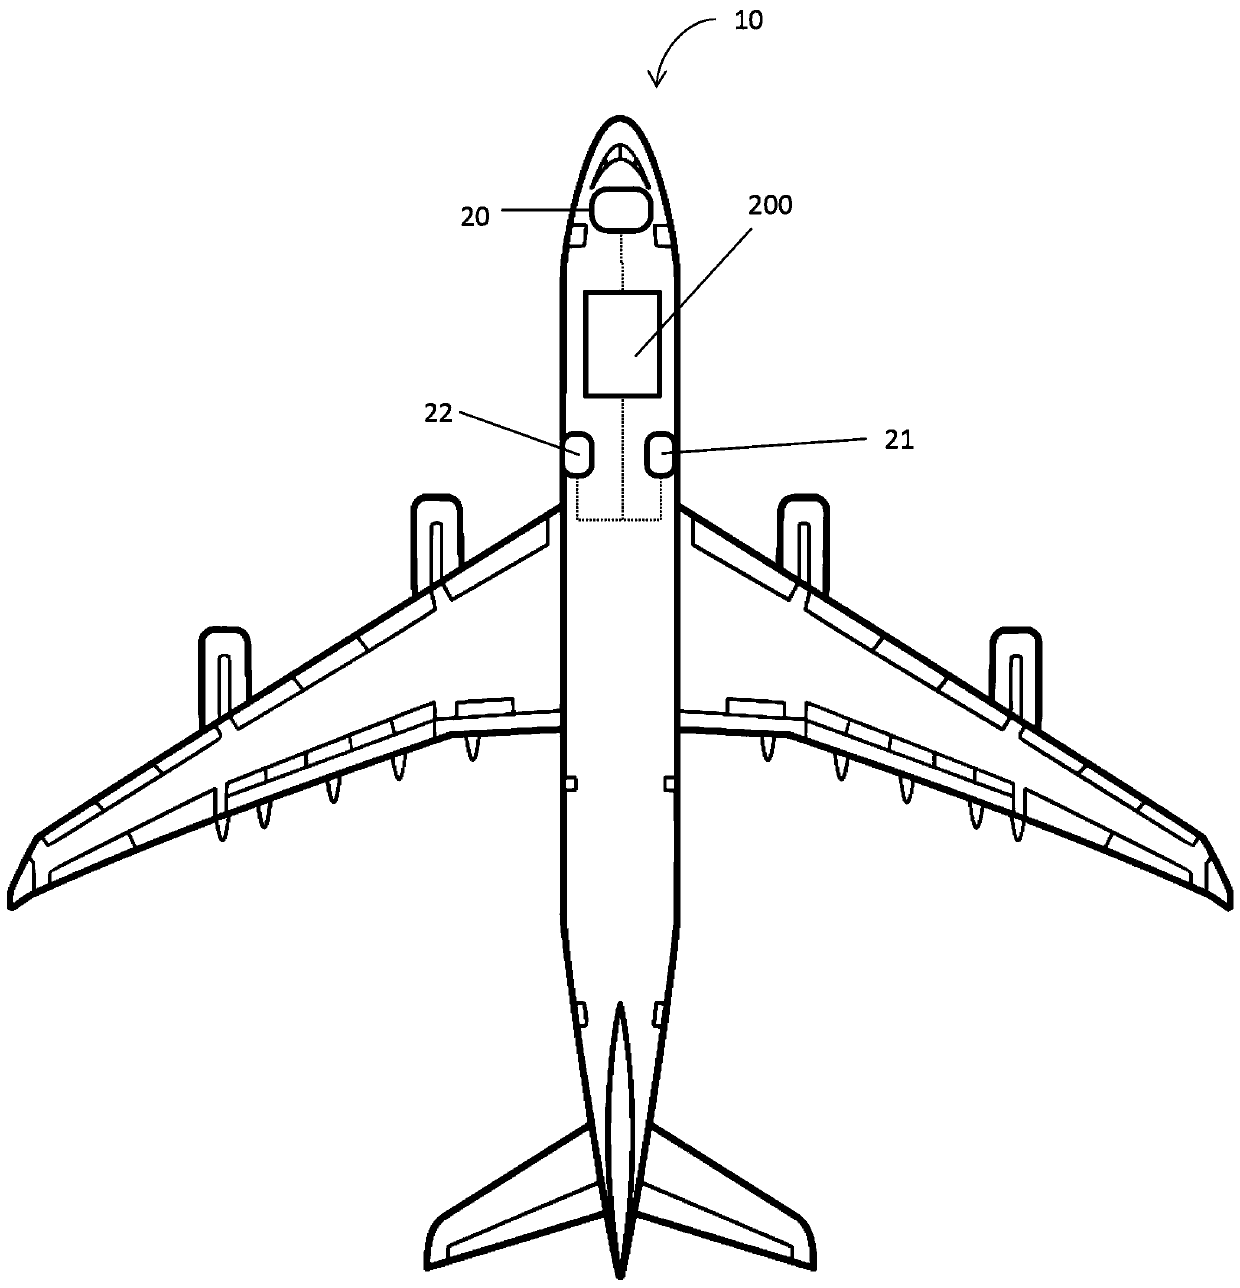 Methods and systems for determining airspeed of an aircraft